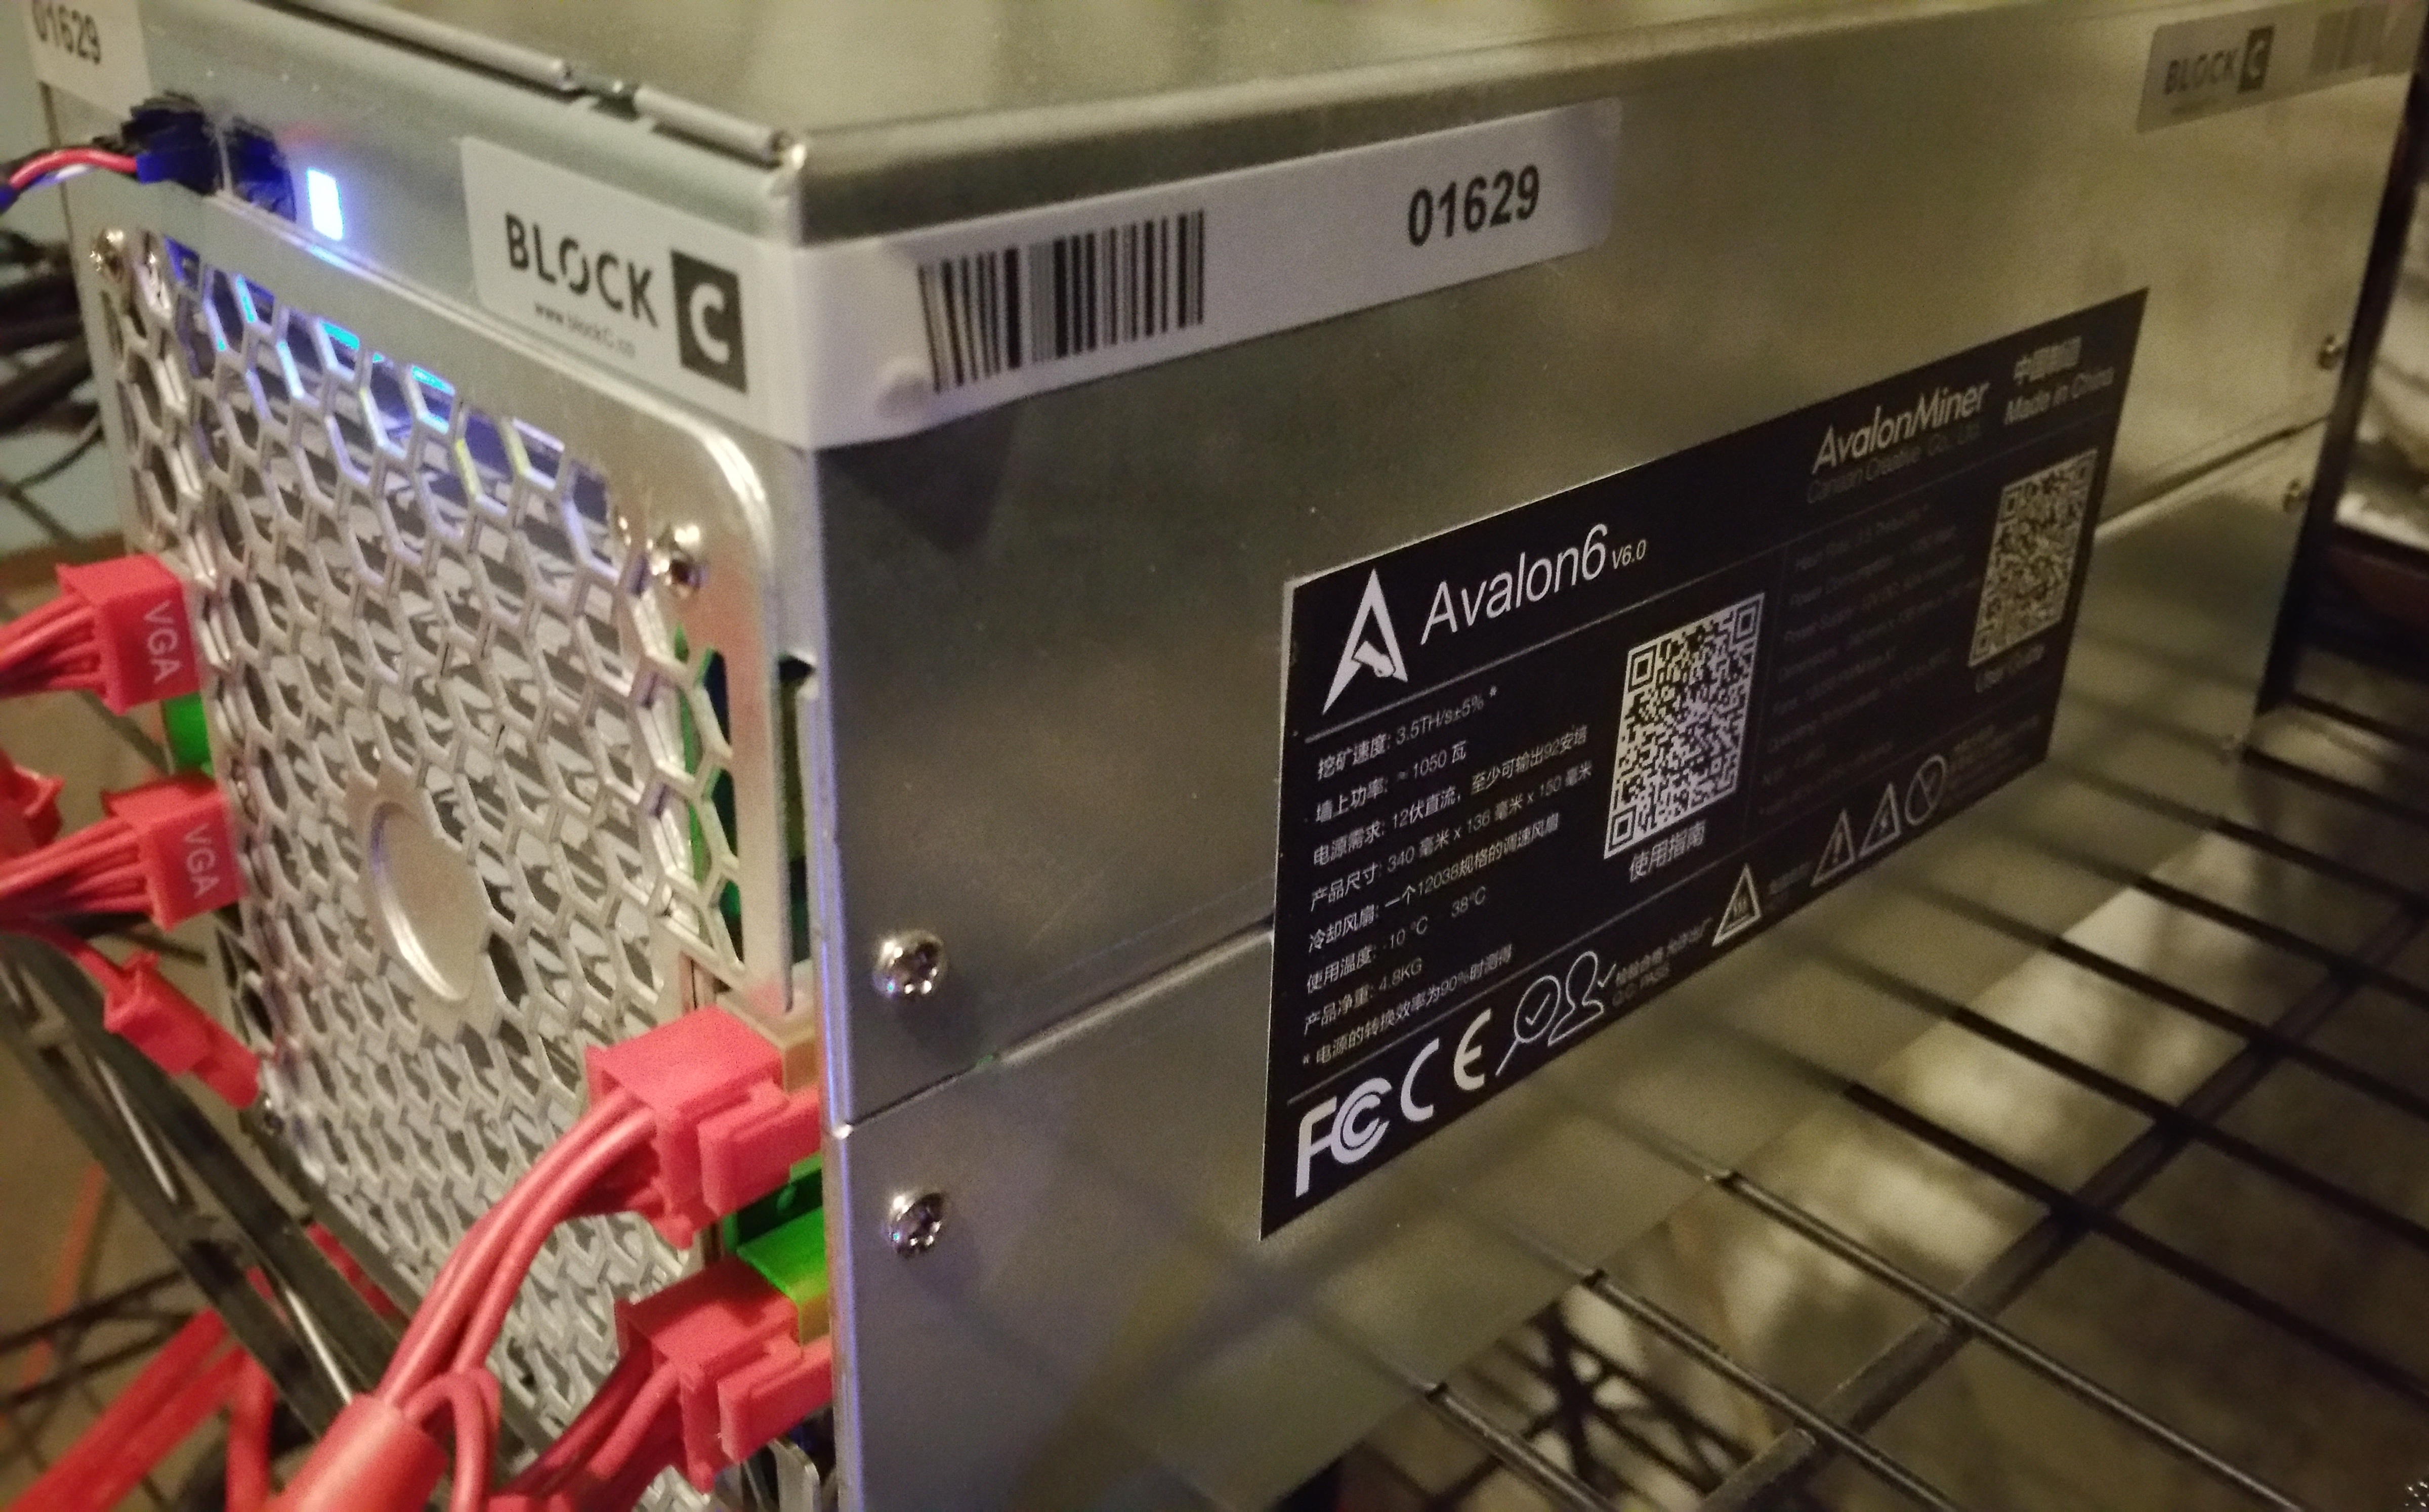 Avalon 6 Review: 3.5 TH/s ASIC Bitcoin Miner Is Stable and Powerful